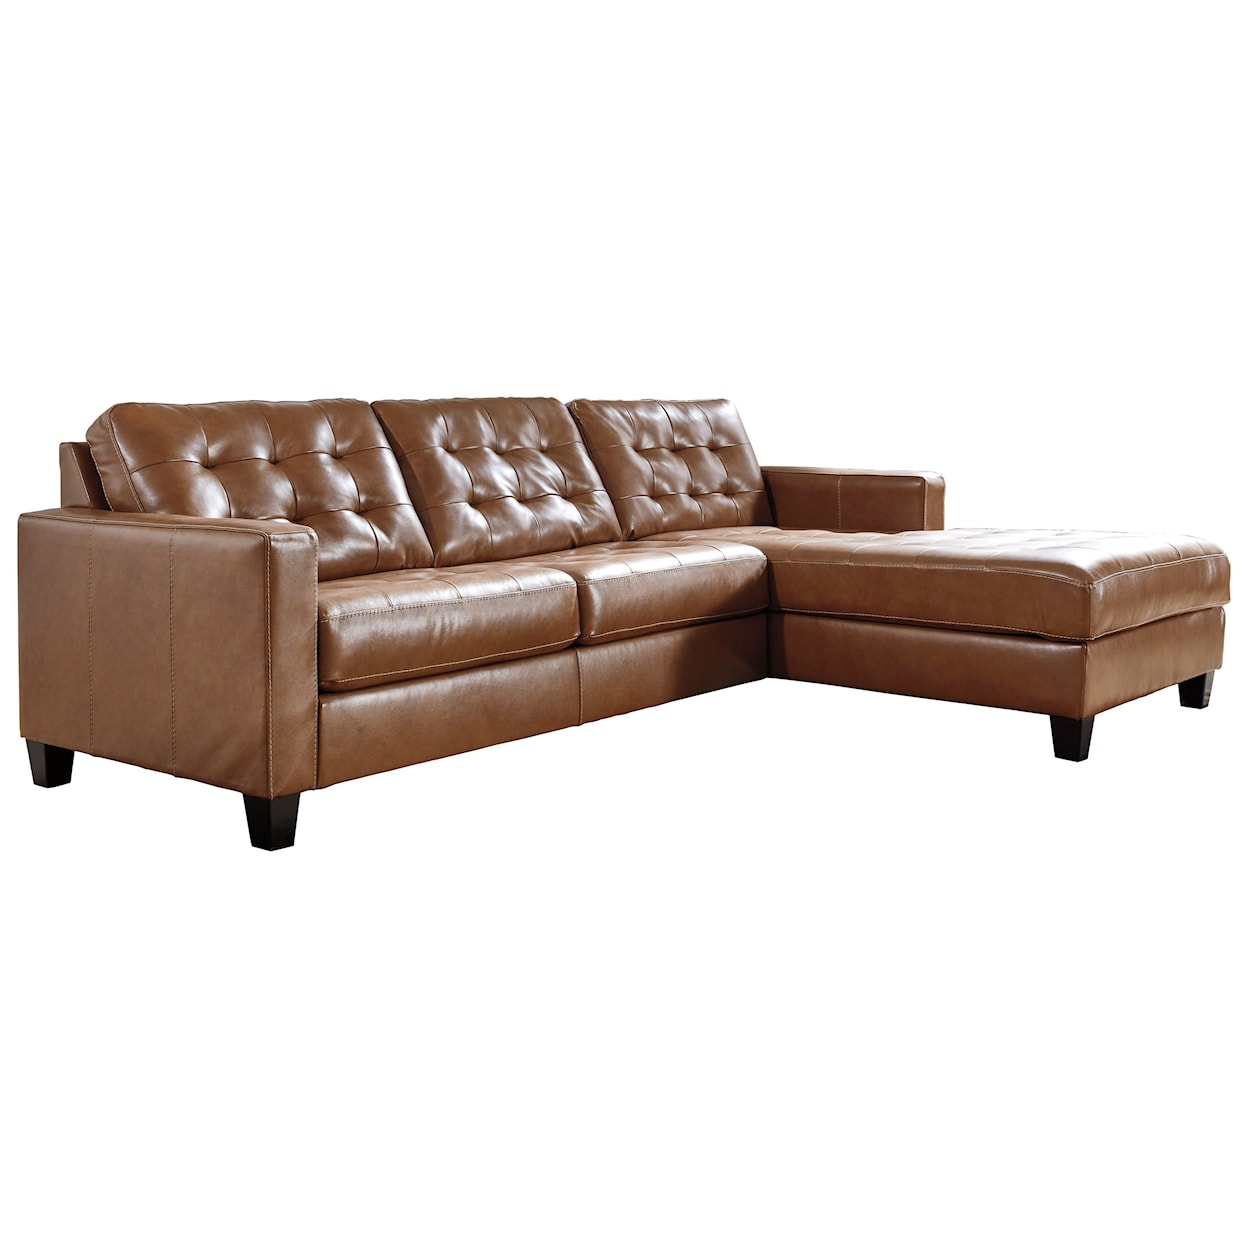 Signature Design by Ashley Furniture Baskove 2-Piece Sectional